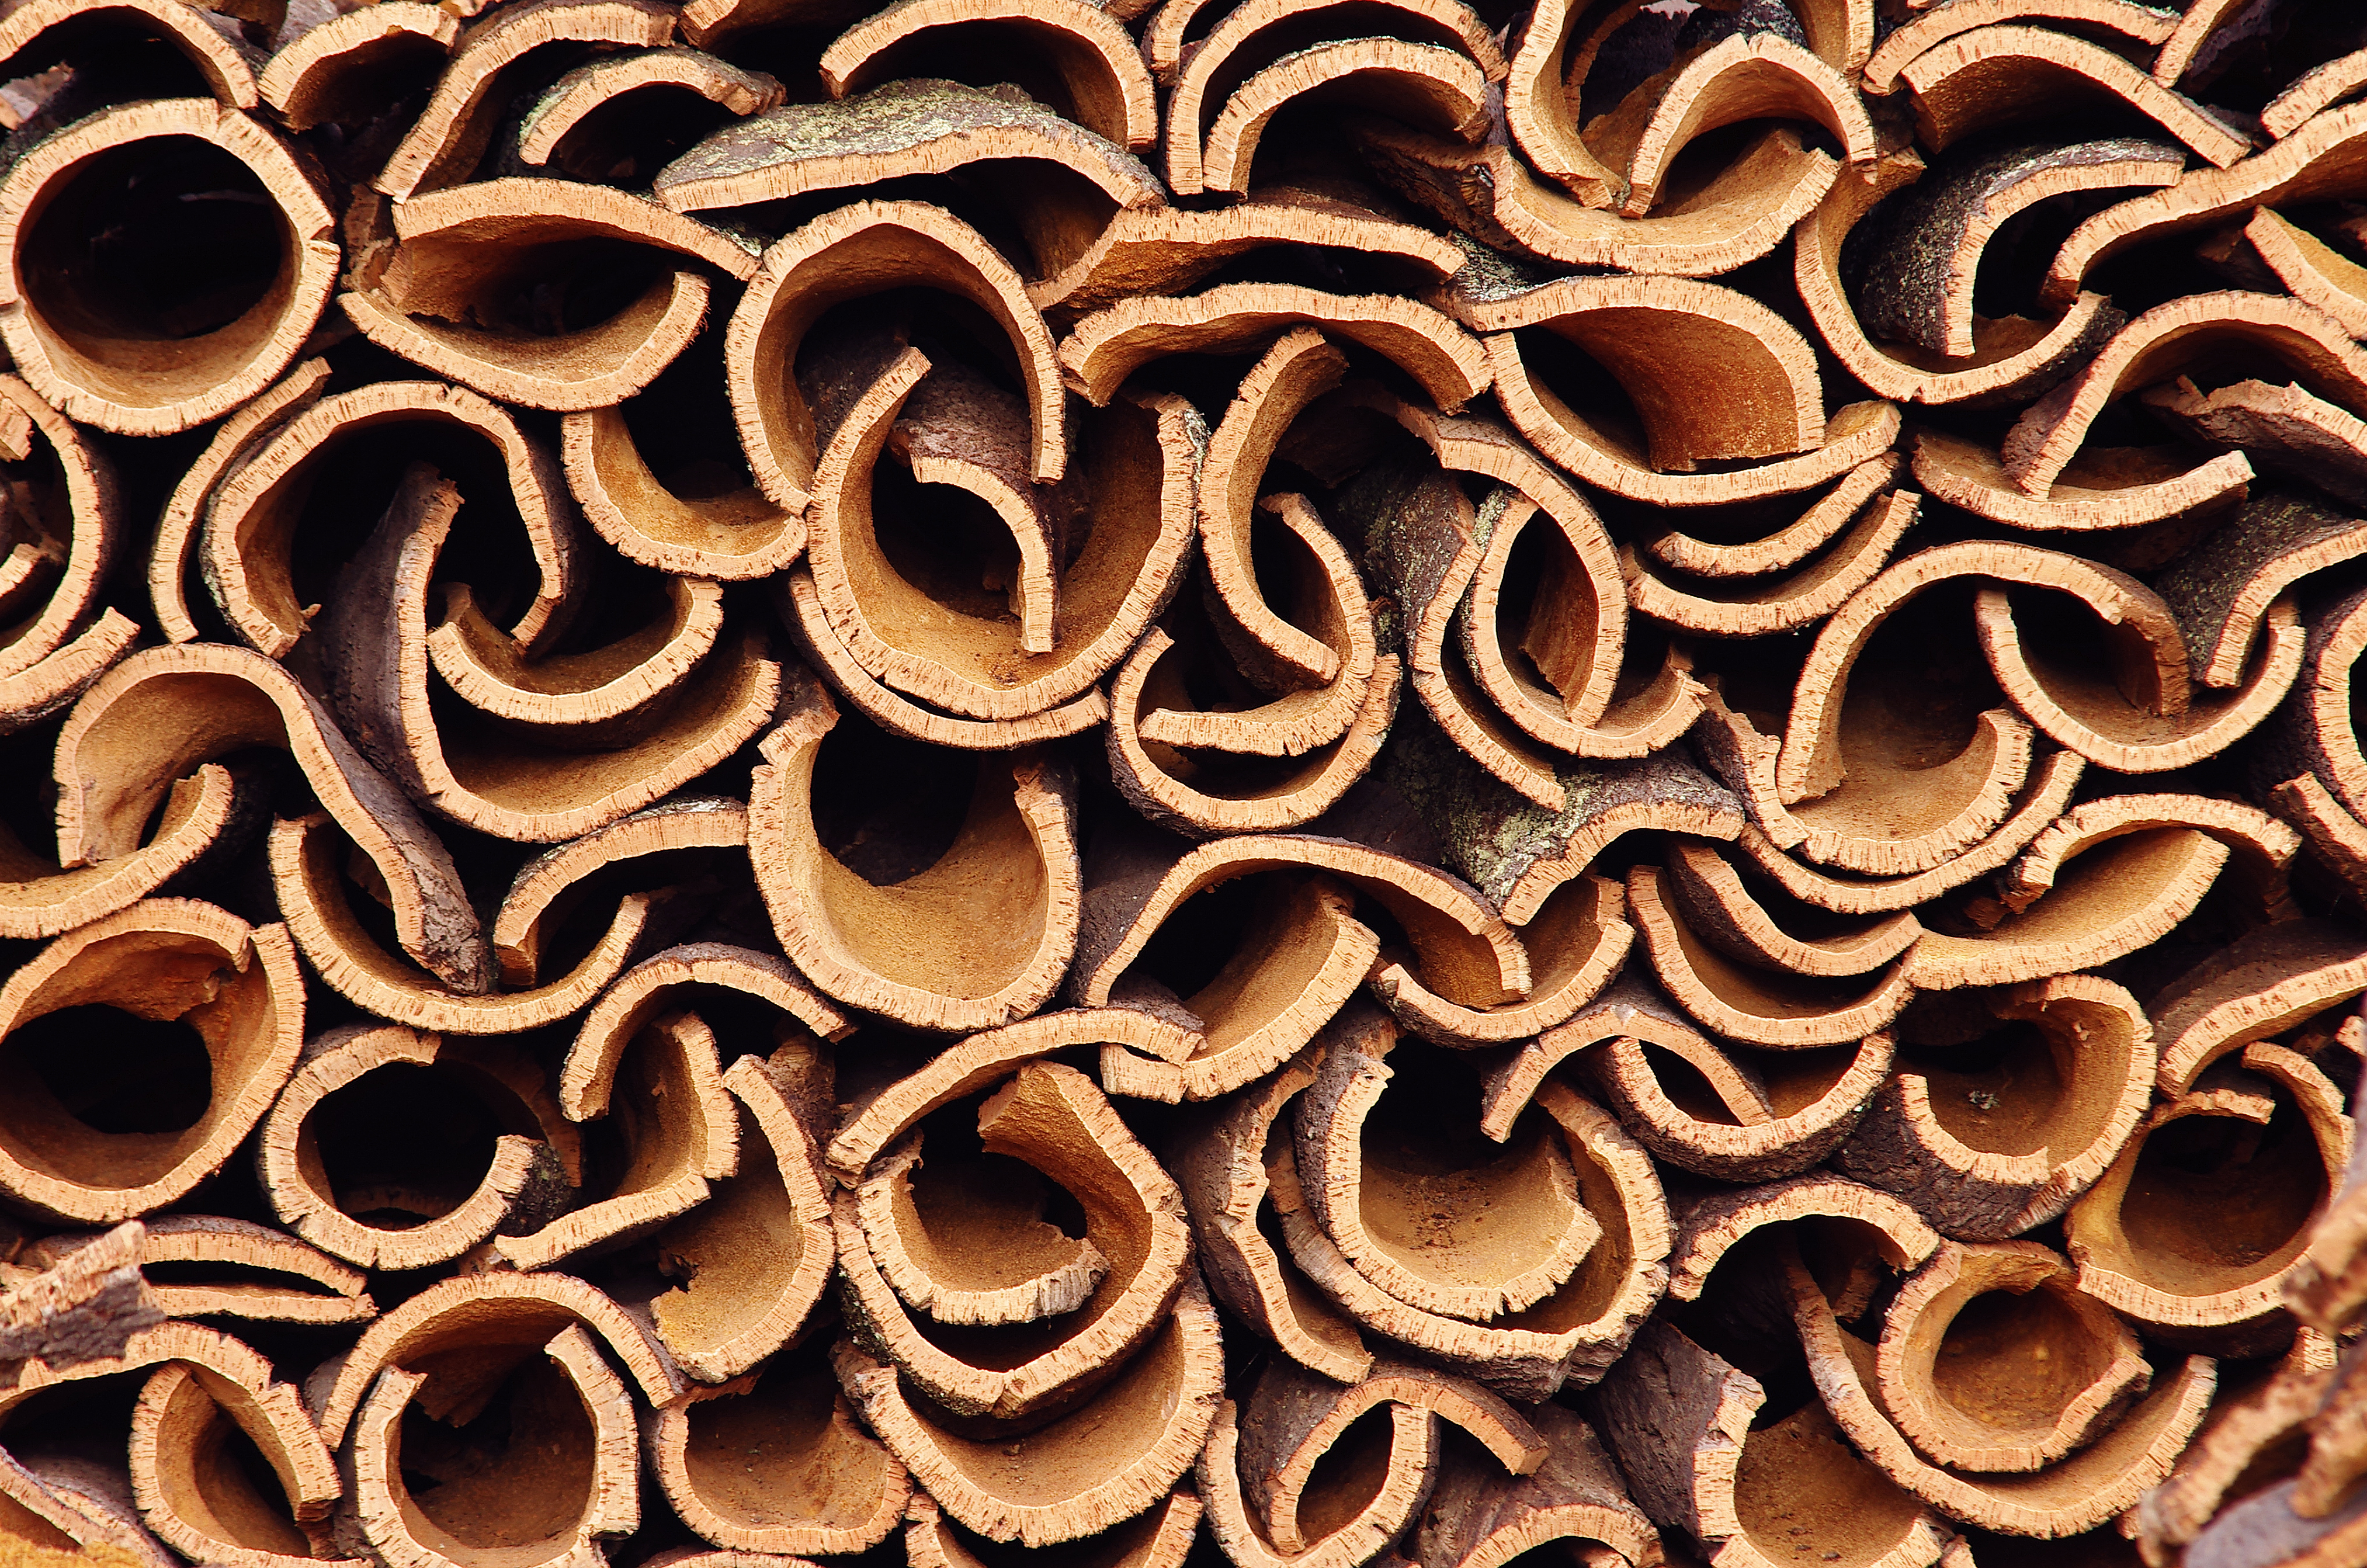 Climate Change Lessons From an Unlikely Source — America’s Forgotten Cork Crisis